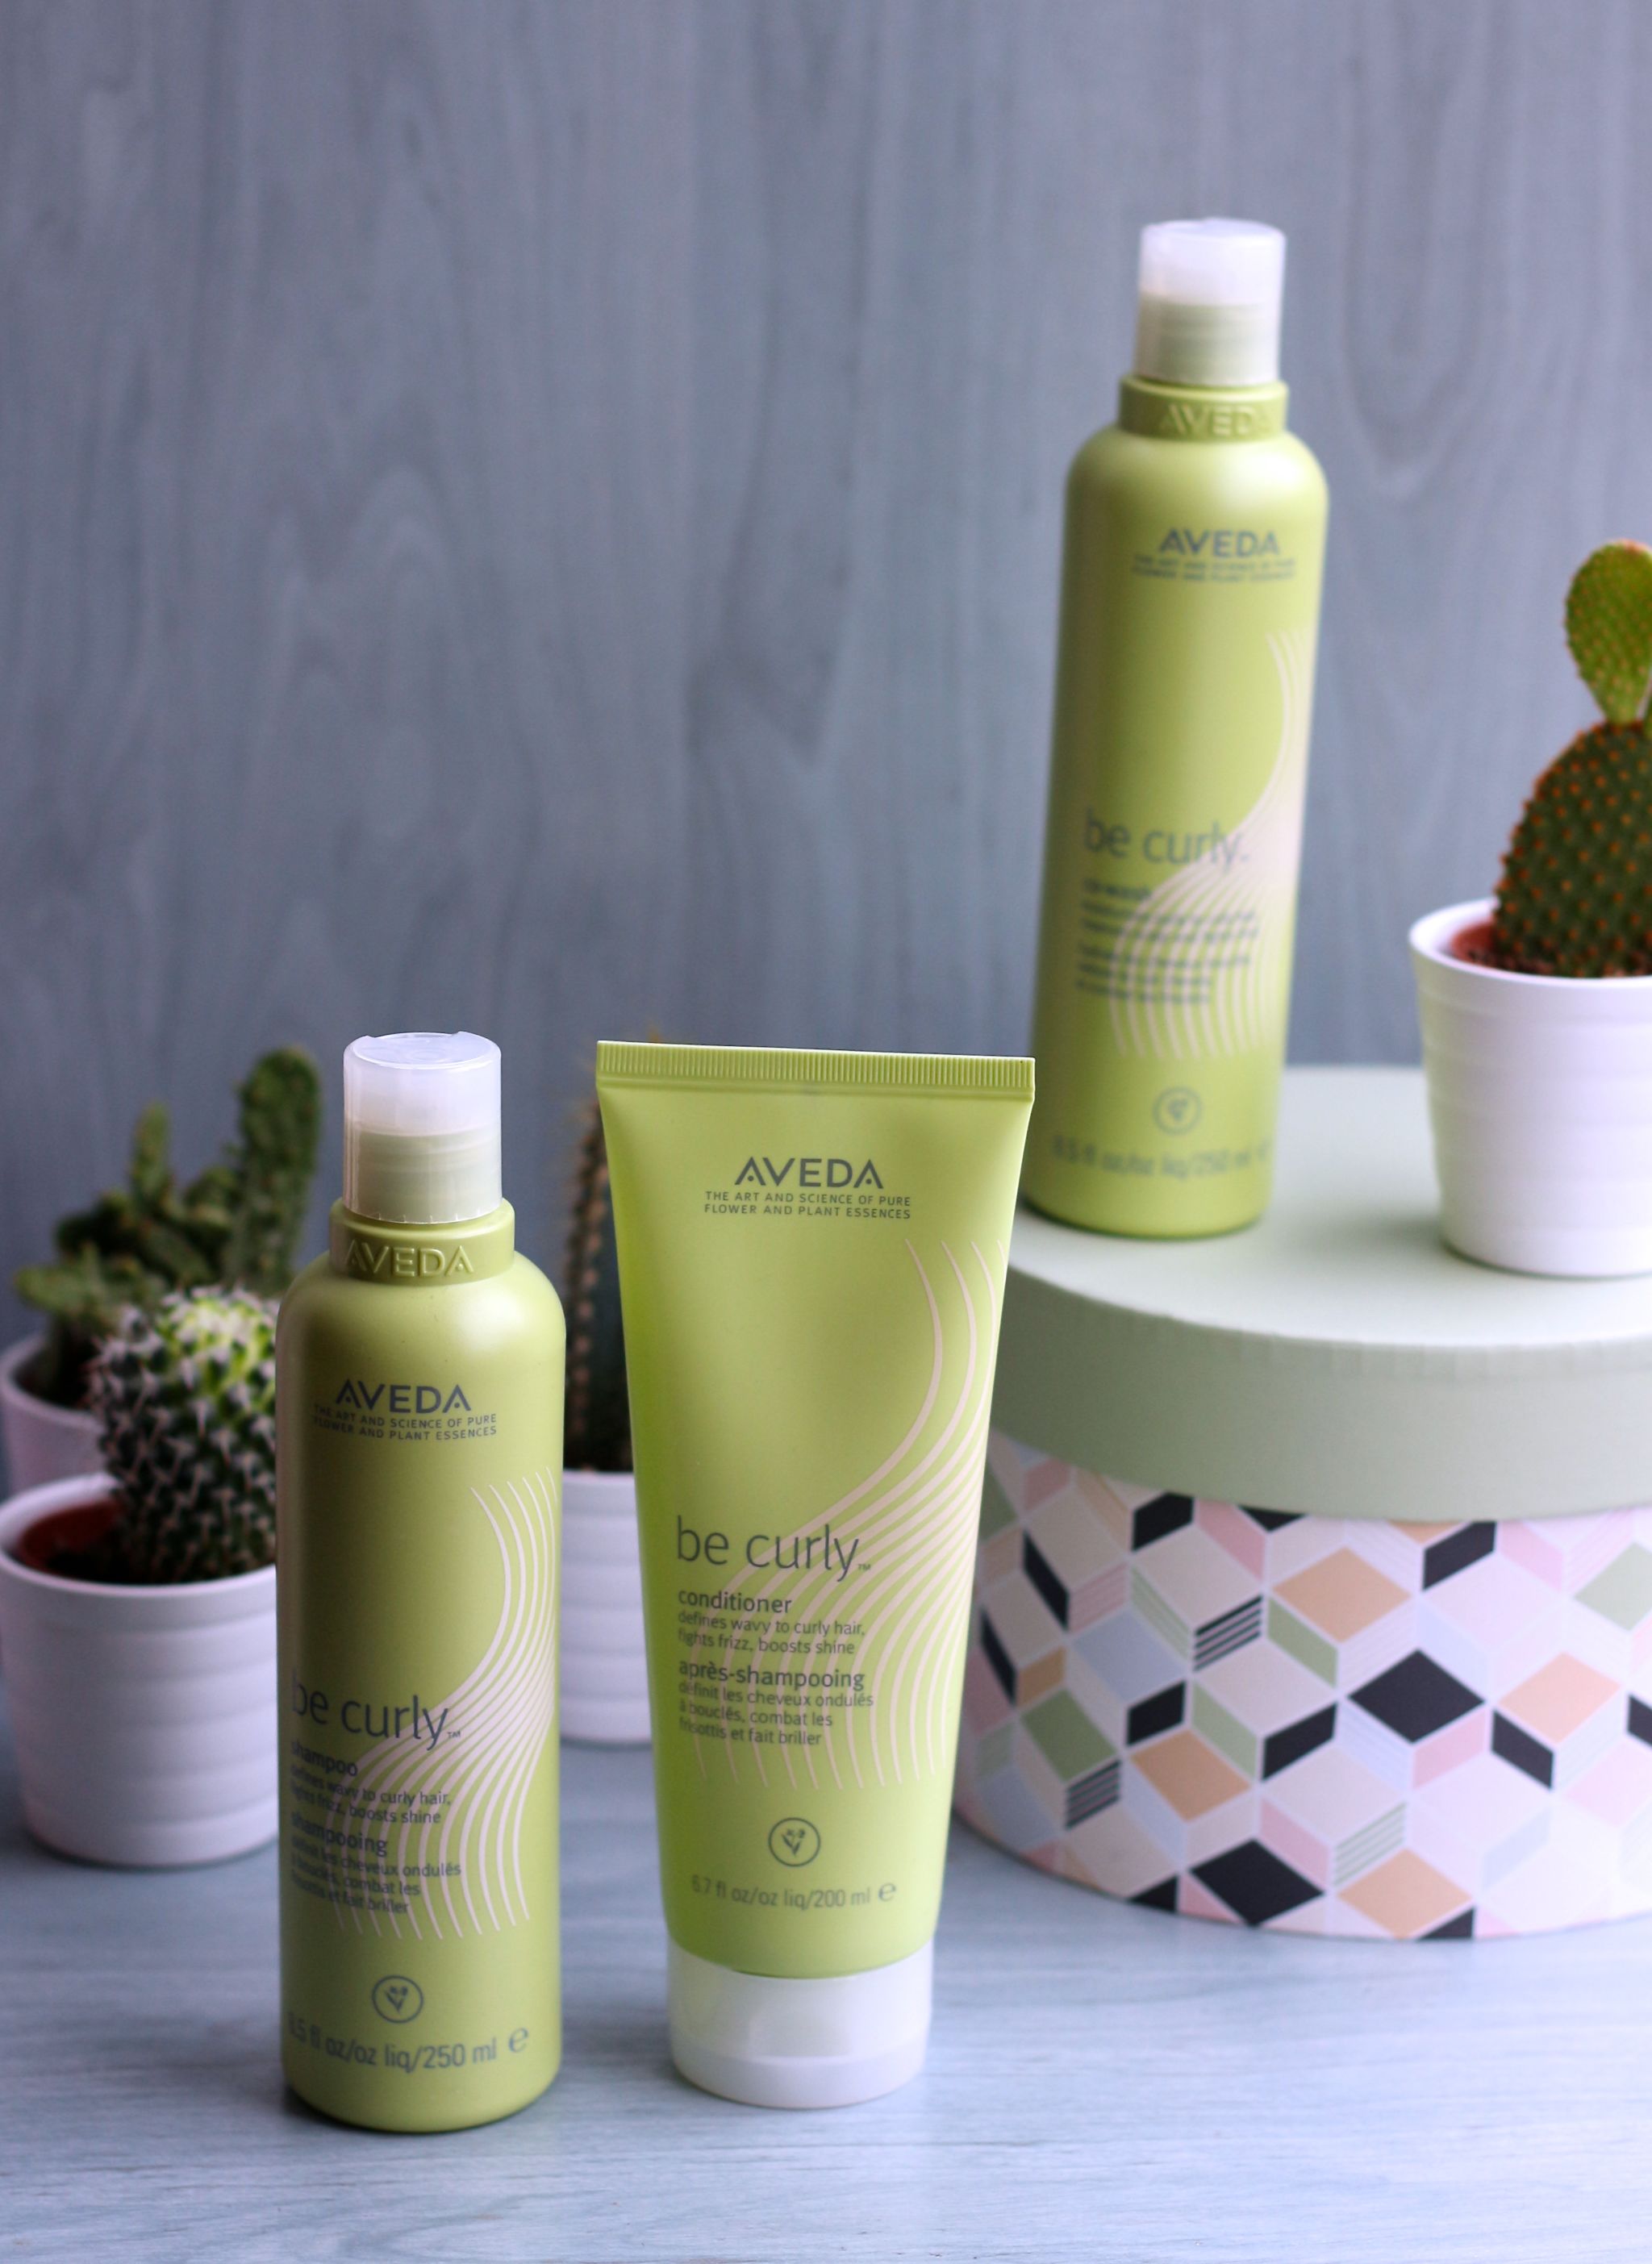 Aveda Be Curly Range for Curly Hair